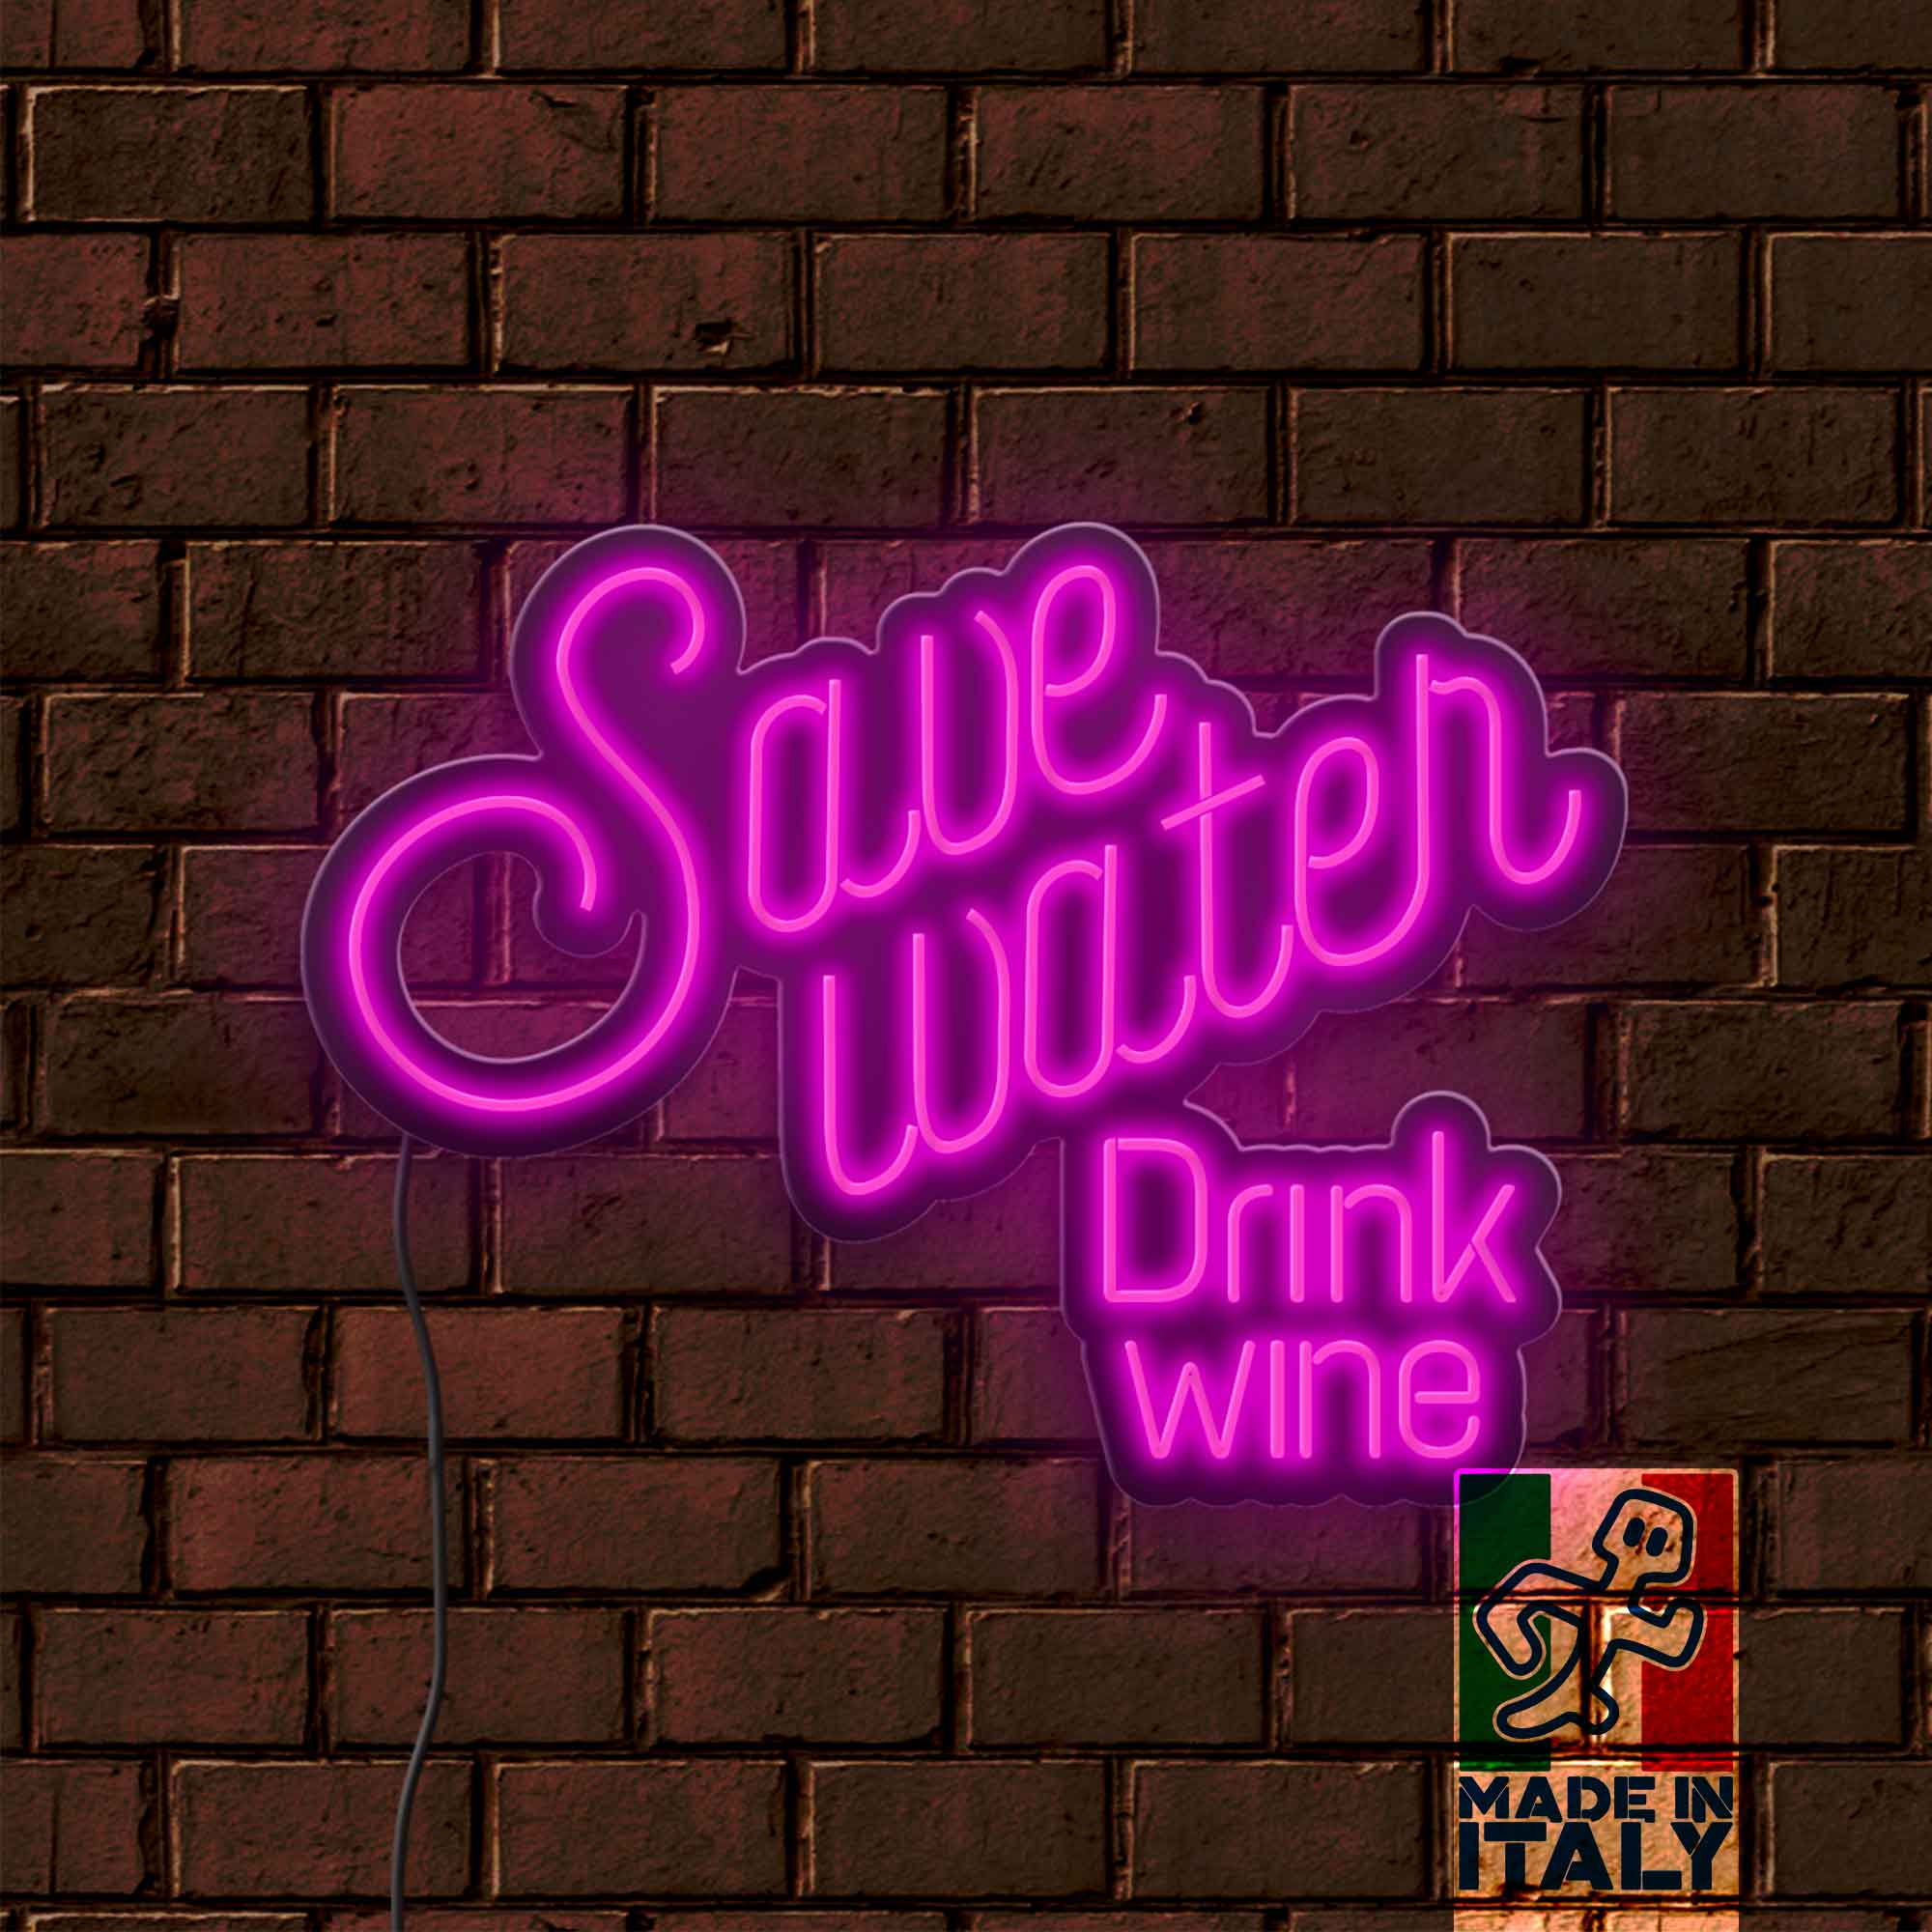 Scritta NEON LED Save Water Drink Wine